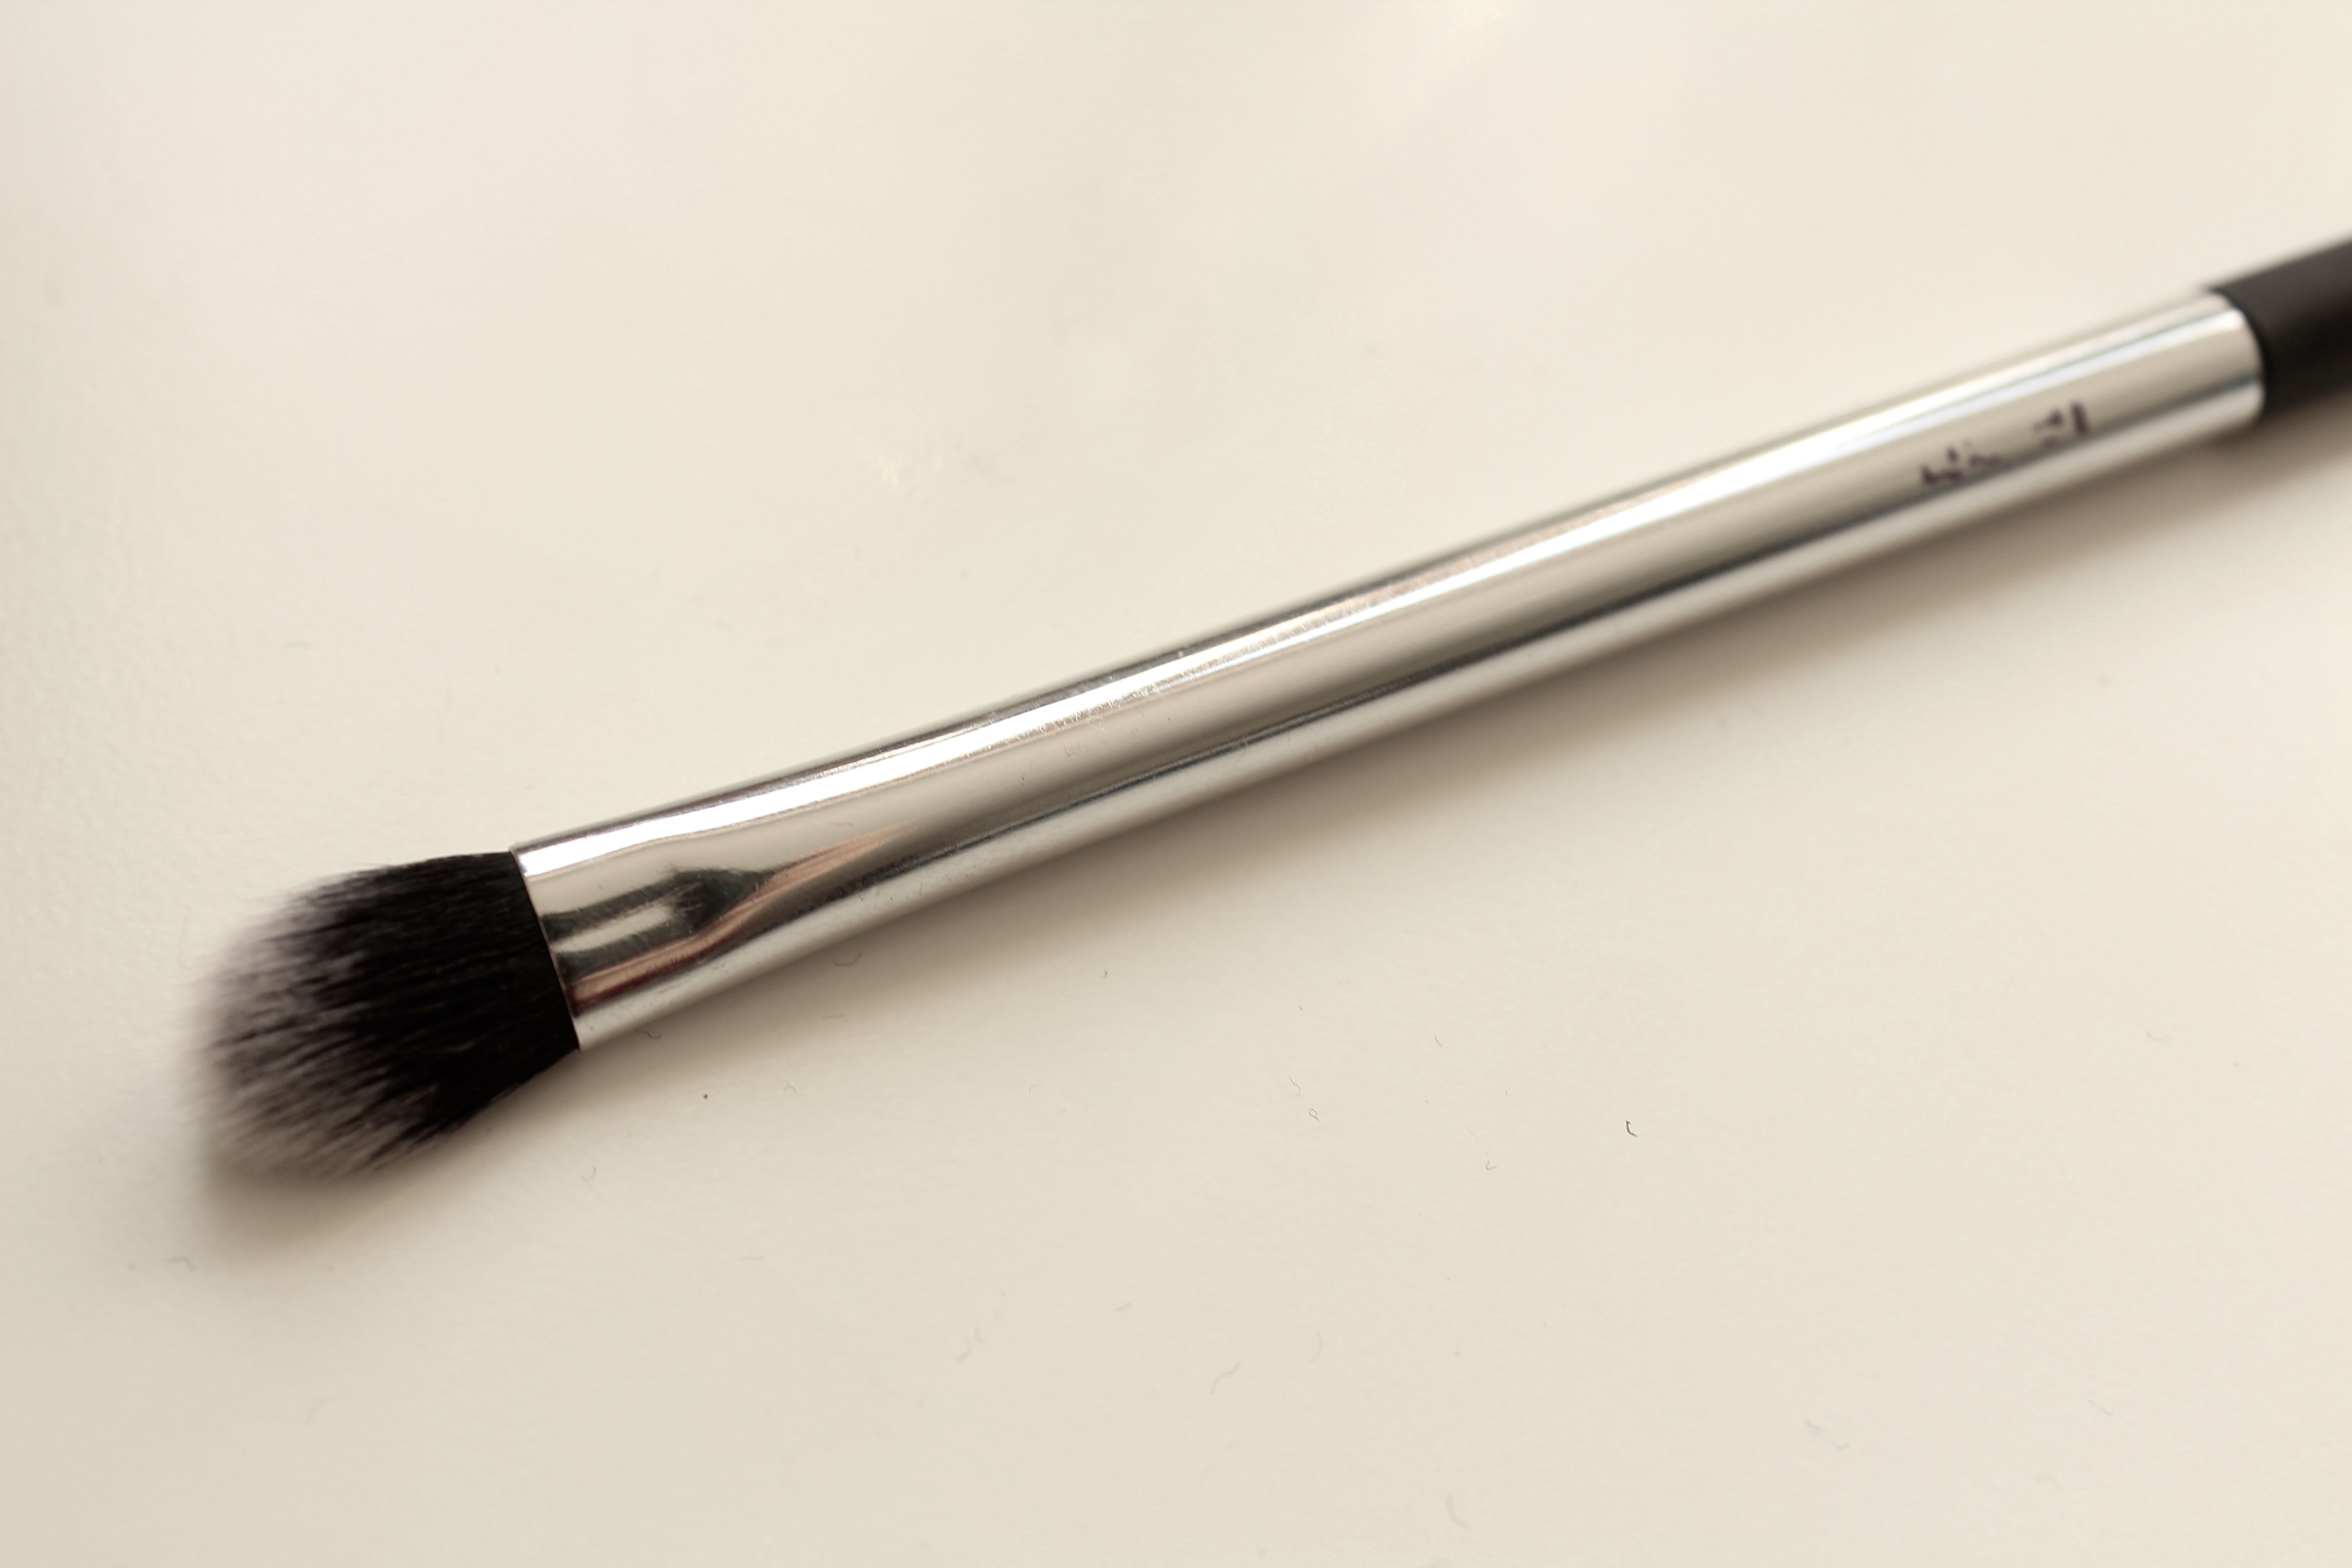 Best 7 Makeup Brushes for Smaller Eyes - Real Techniques Base Shadow Brush by Face Made up